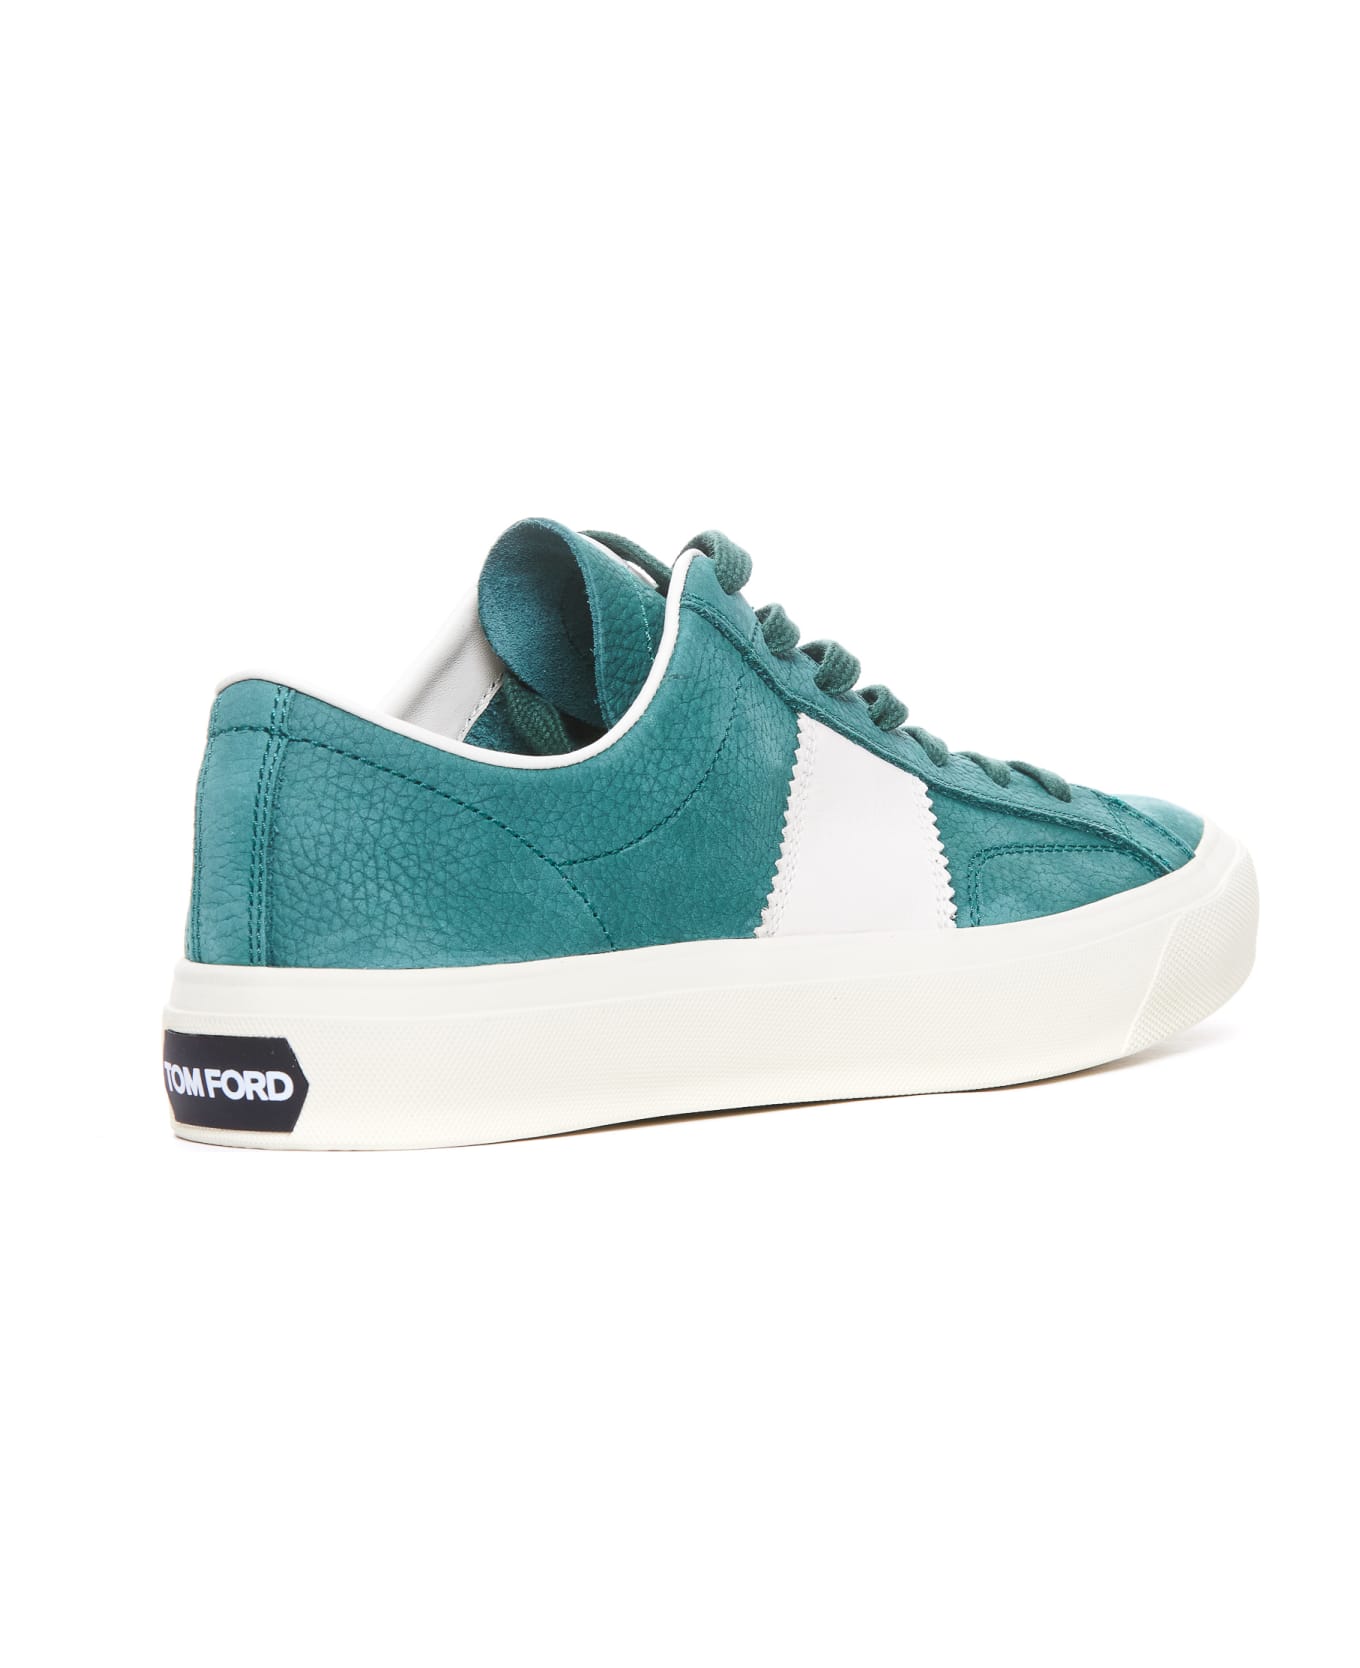 Tom Ford Suede Cambridge Sneakers - Green